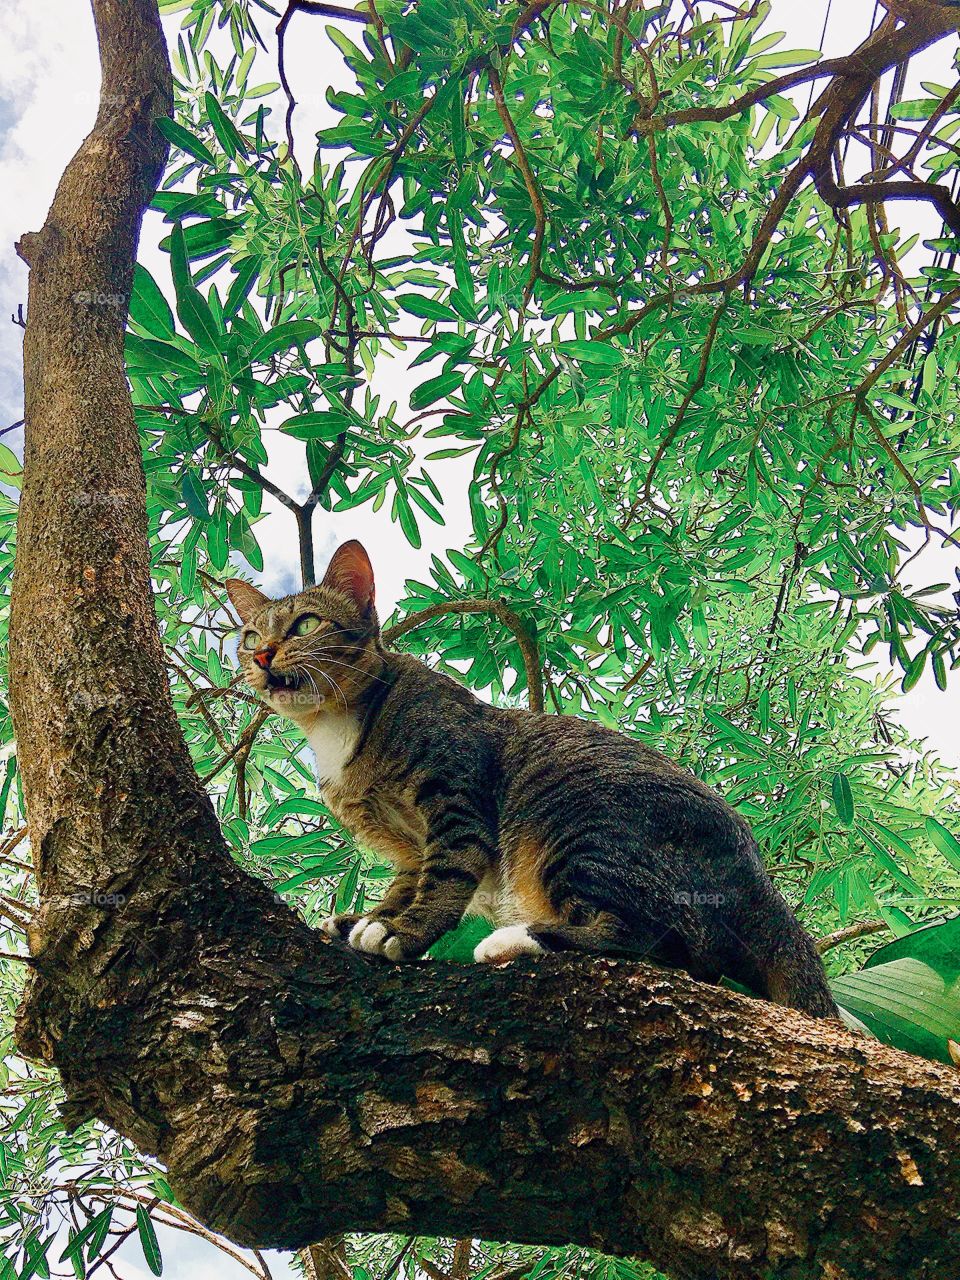 The hunger cat claimed on the tree